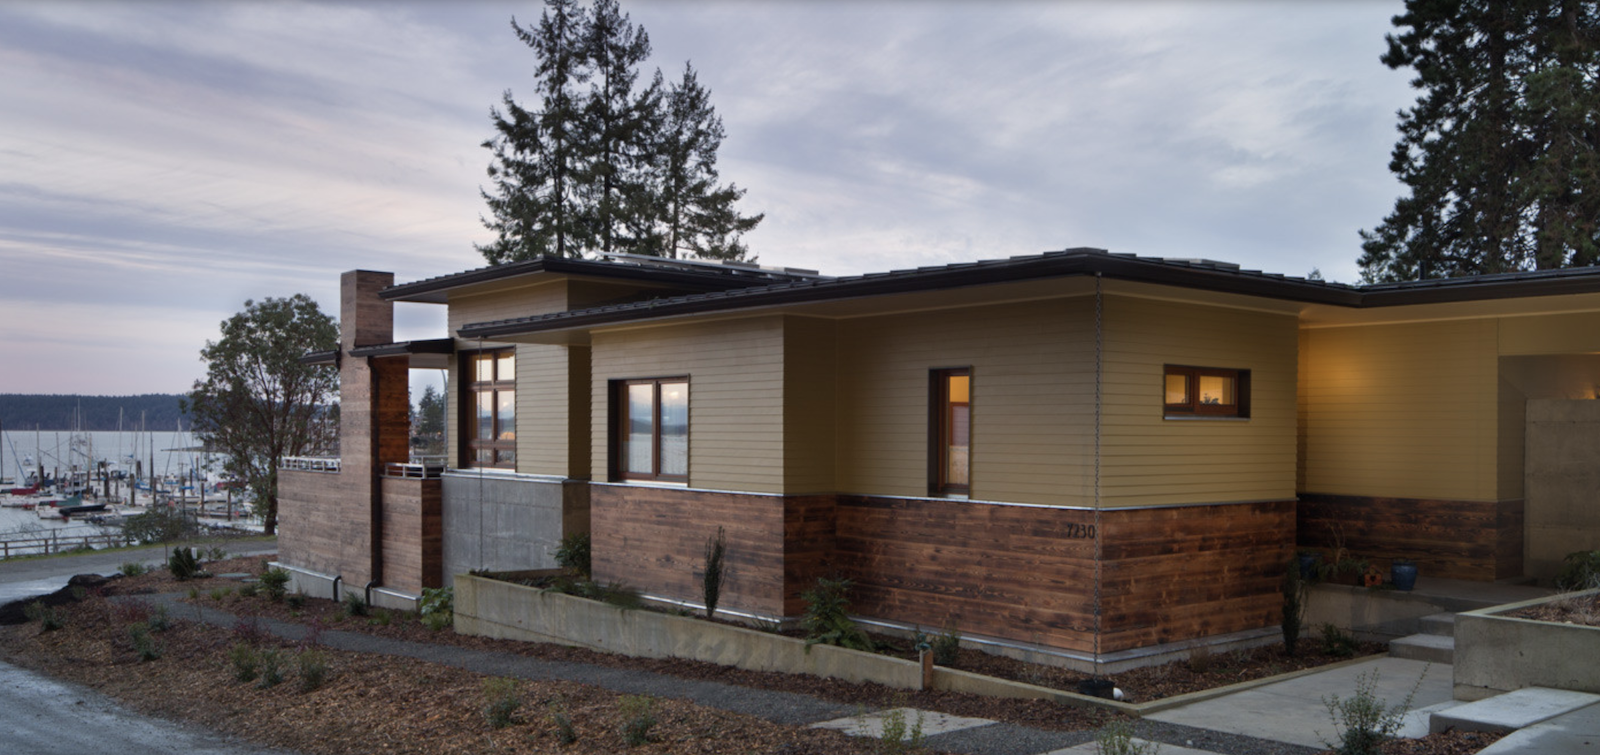 Prairie Passive house energy-efficient home on Puget Sound designed by The Artisans Group provides for aging in place